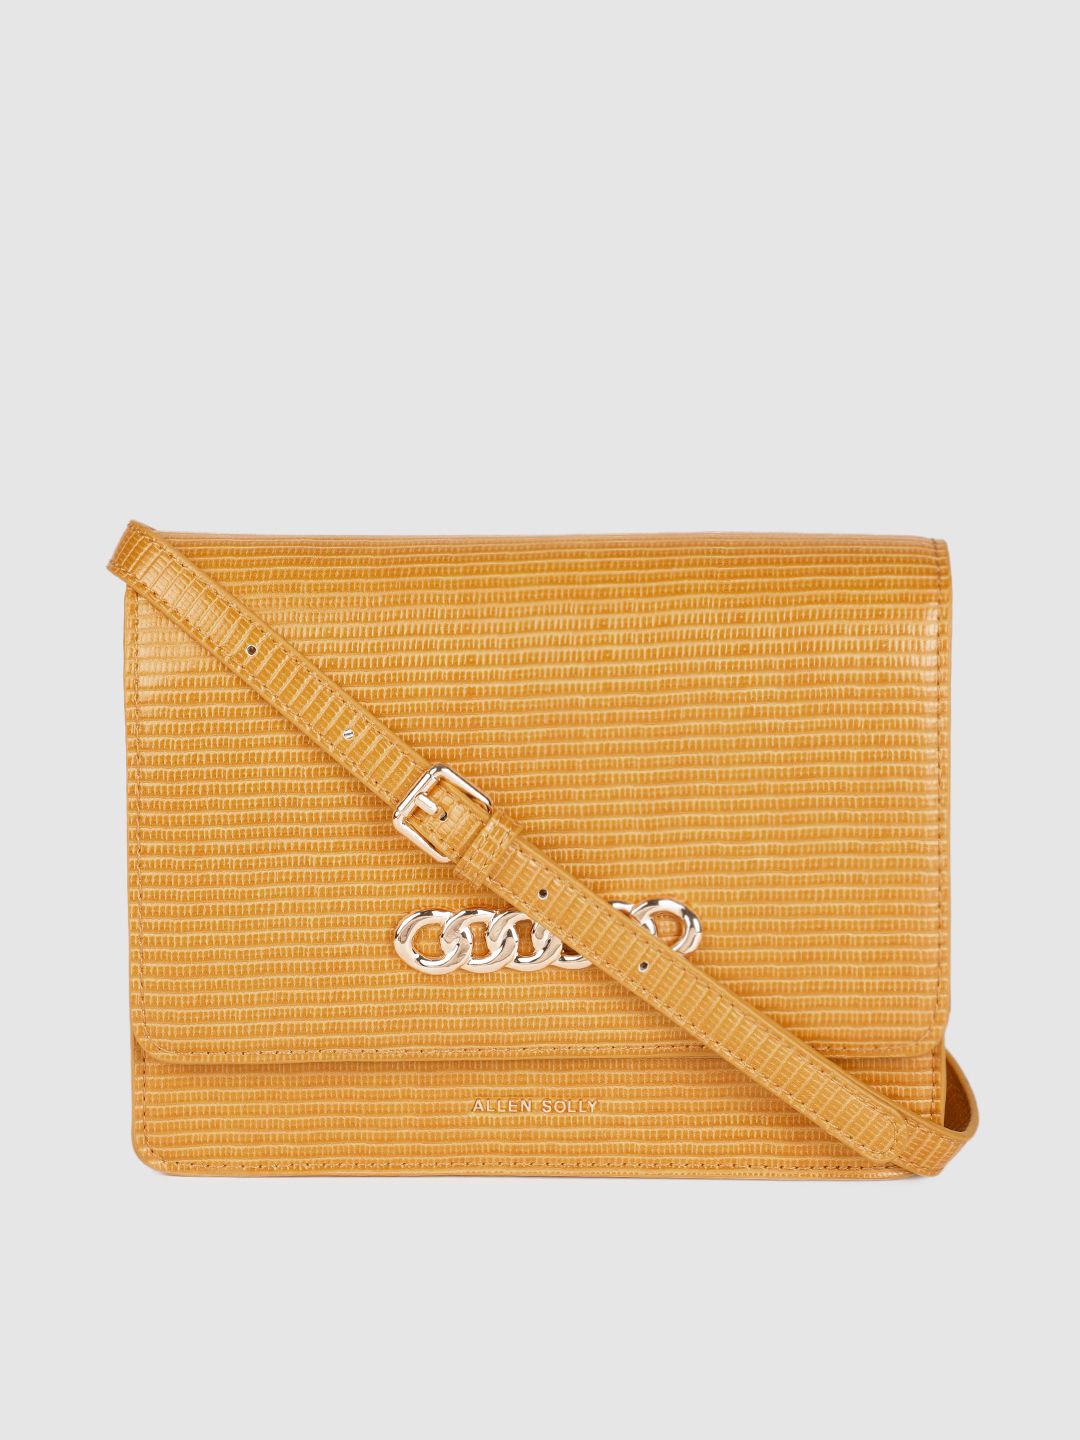 Allen Solly Mustard Yellow Snakeskin Textured Structured Sling Bag Price in India